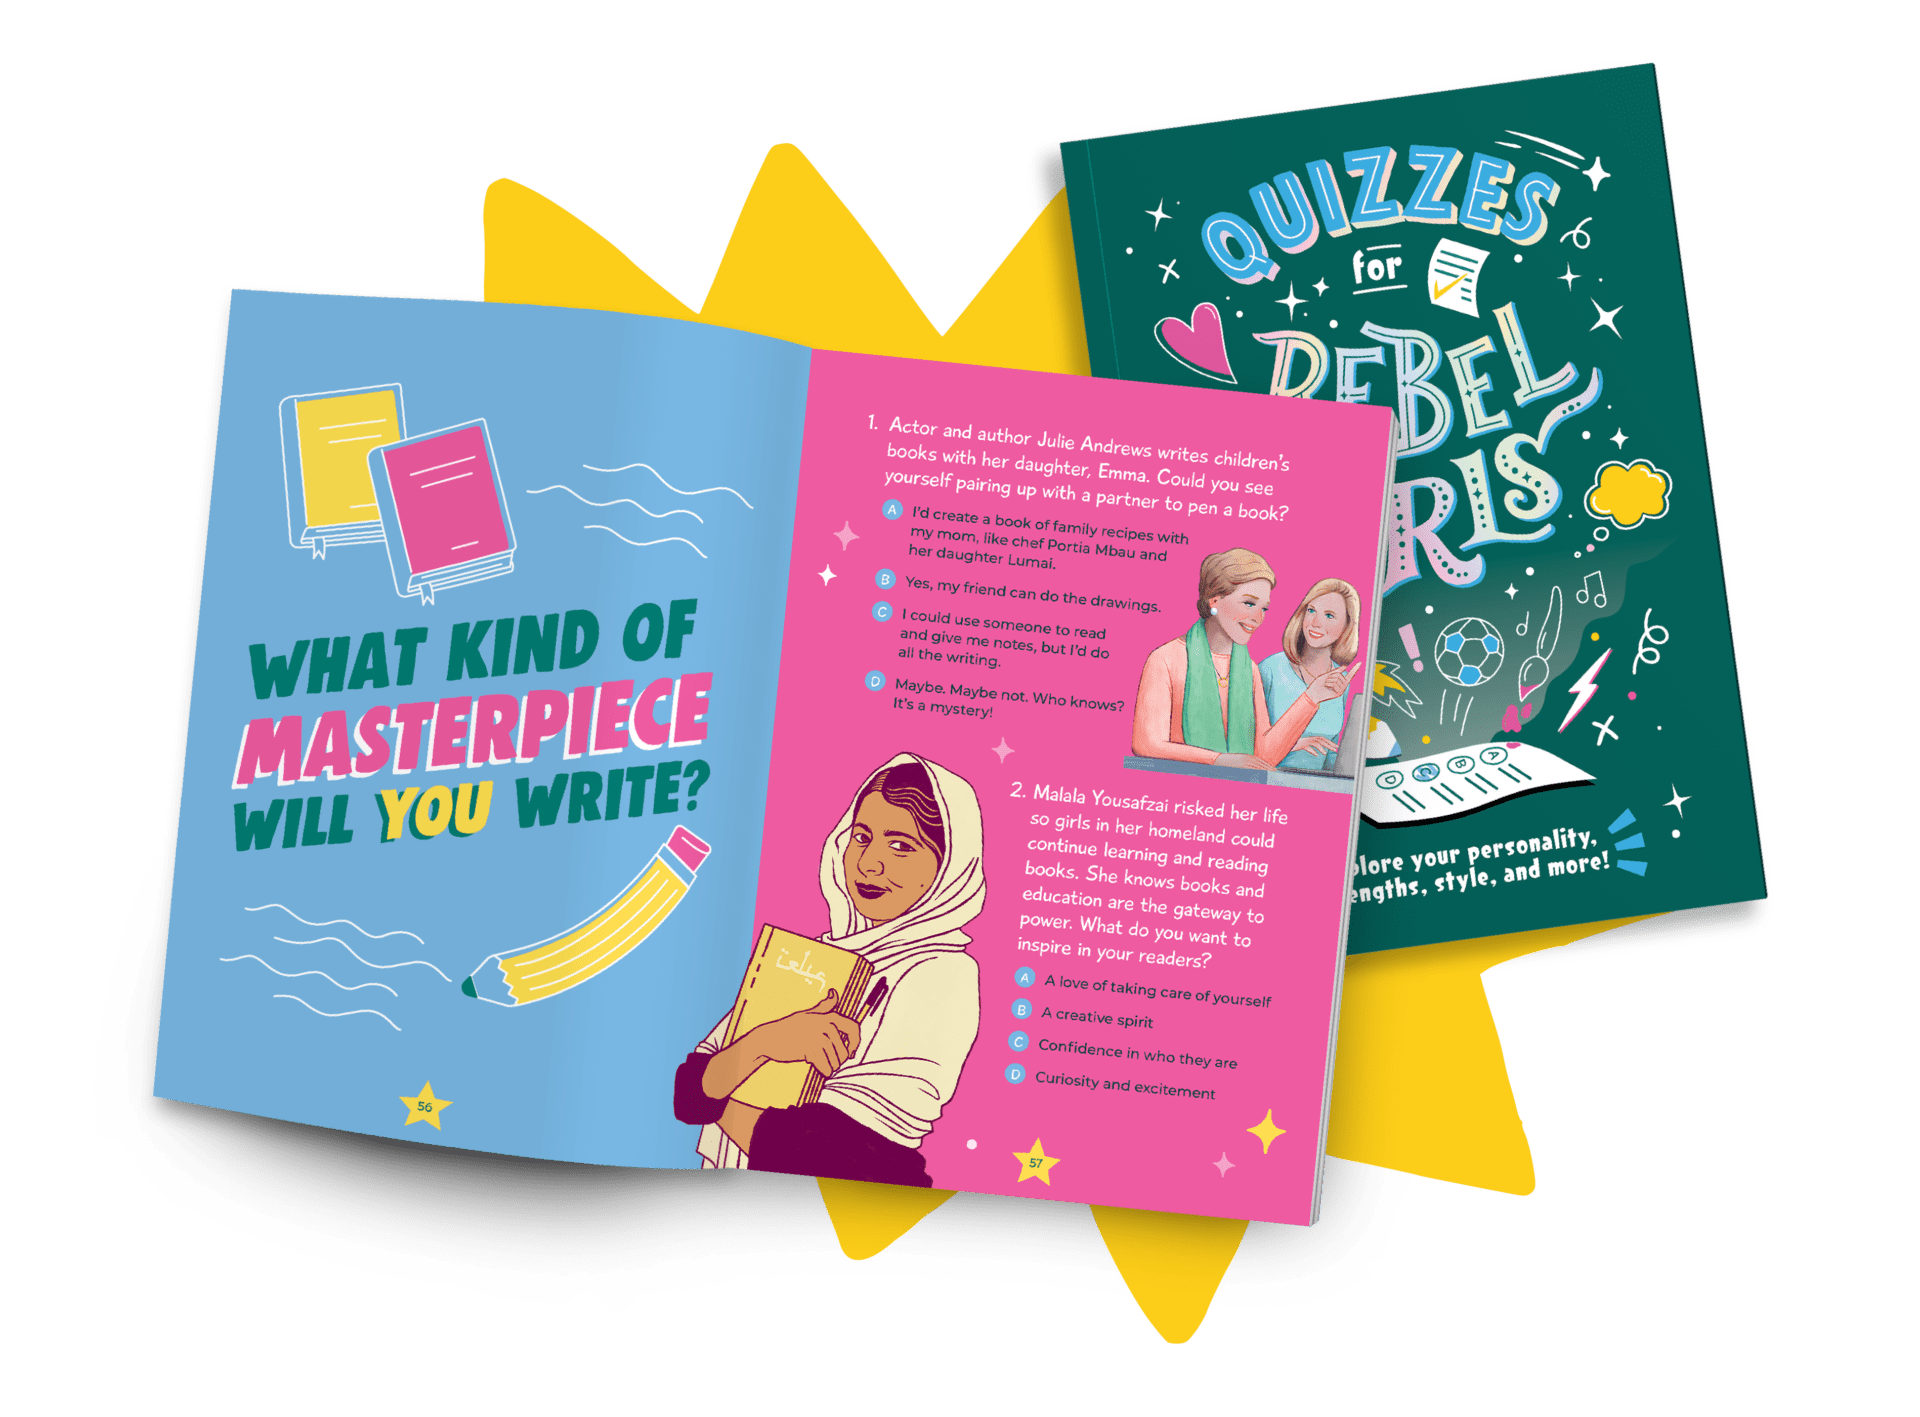 <p>Quizzes for Rebel Girls is packed with 50+ quizzes guiding girls to discover the traits, strengths, and habits that make them unique. The quirky questions in this book will help curious readers explore their personalities, forecast their futures, and find common ground with extraordinary women who’ve come before. Colorful illustrations bring this book to life and make it extra fun to share with friends and family!</p>
<p>This book can be perfectly paired with Questions for Rebel Girls, filled with silly, serious, and thought-provoking questions that introduce readers to extraordinary women throughout history. Girls love to explore their feelings, uncover their personality, and decode the world around them. Get exploring with Rebel Girls!</p>
